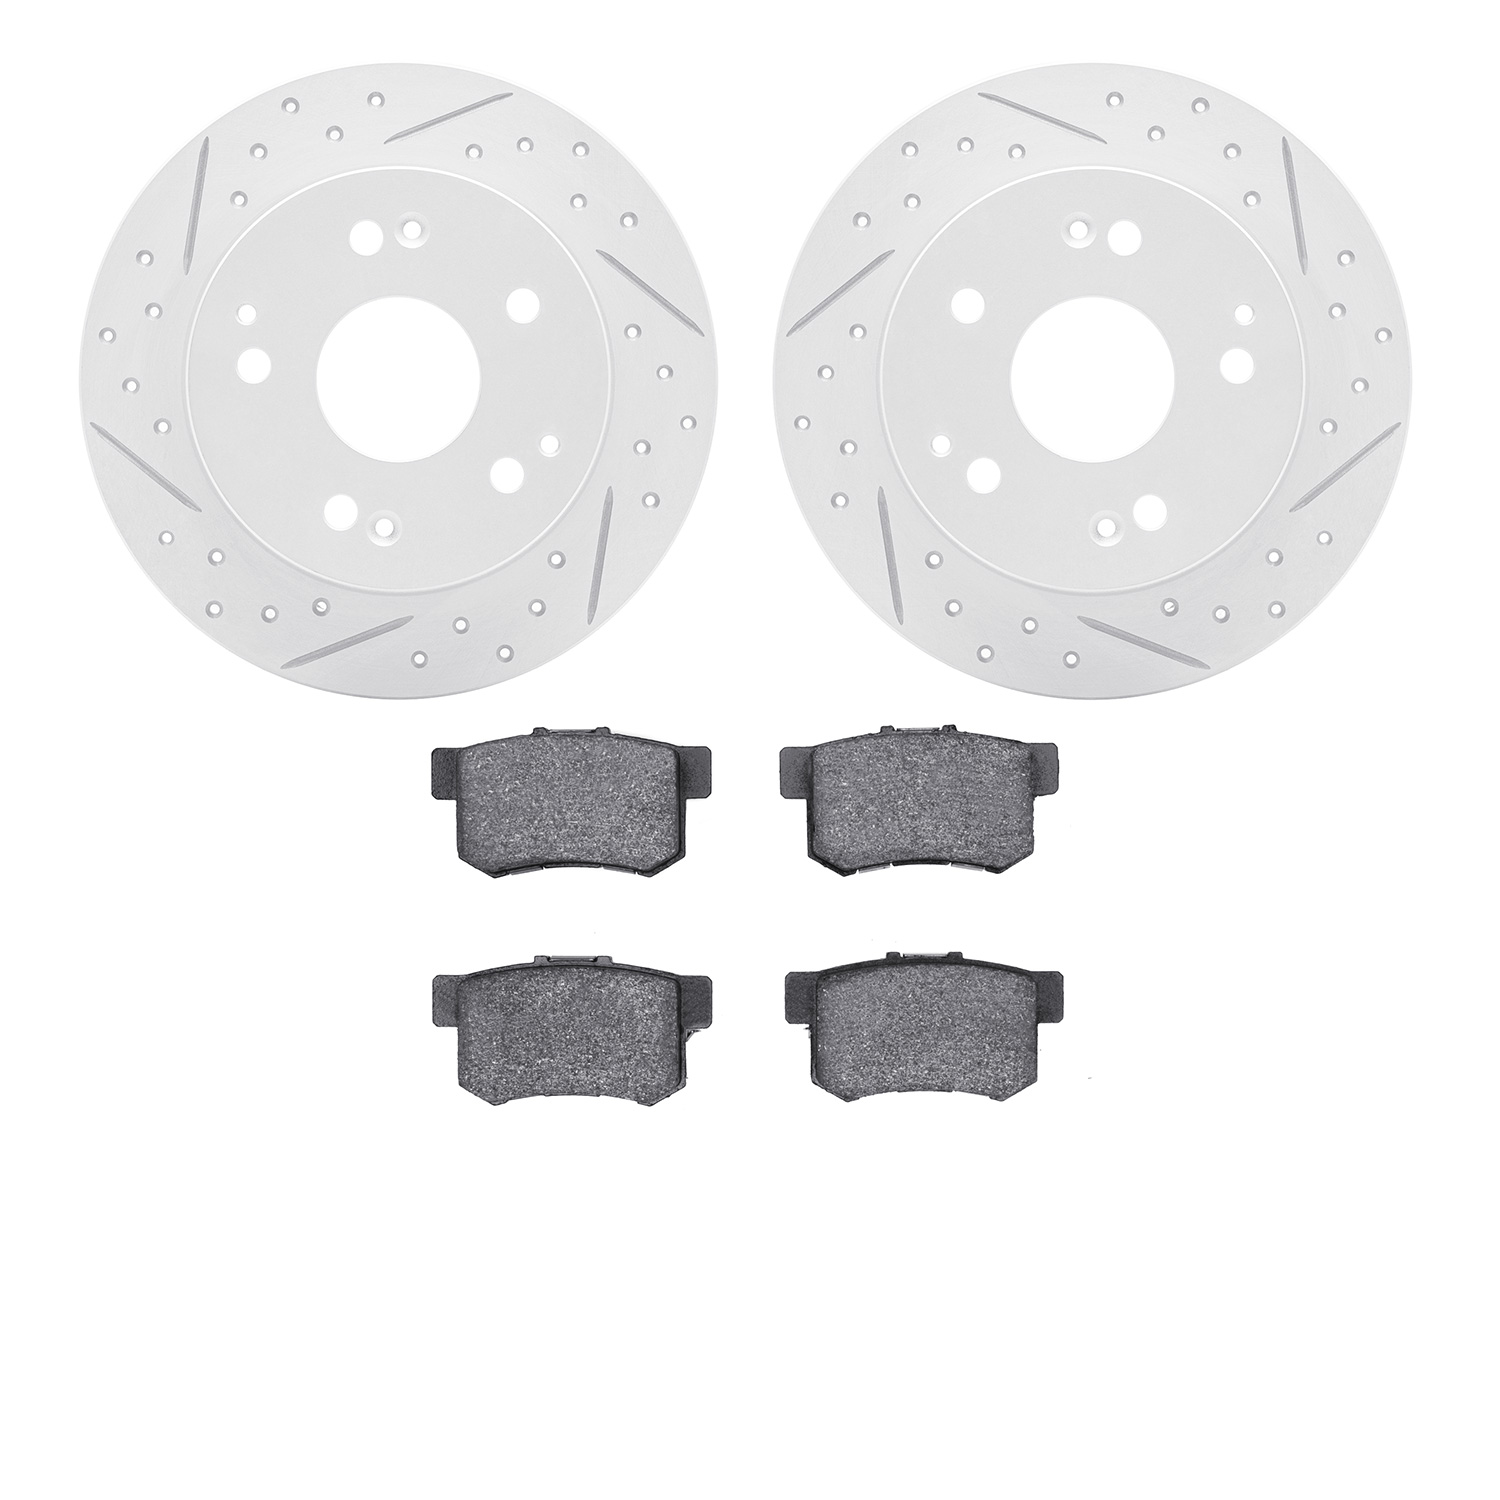 2502-59022 Geoperformance Drilled/Slotted Rotors w/5000 Advanced Brake Pads Kit, 1997-2006 Acura/Honda, Position: Rear